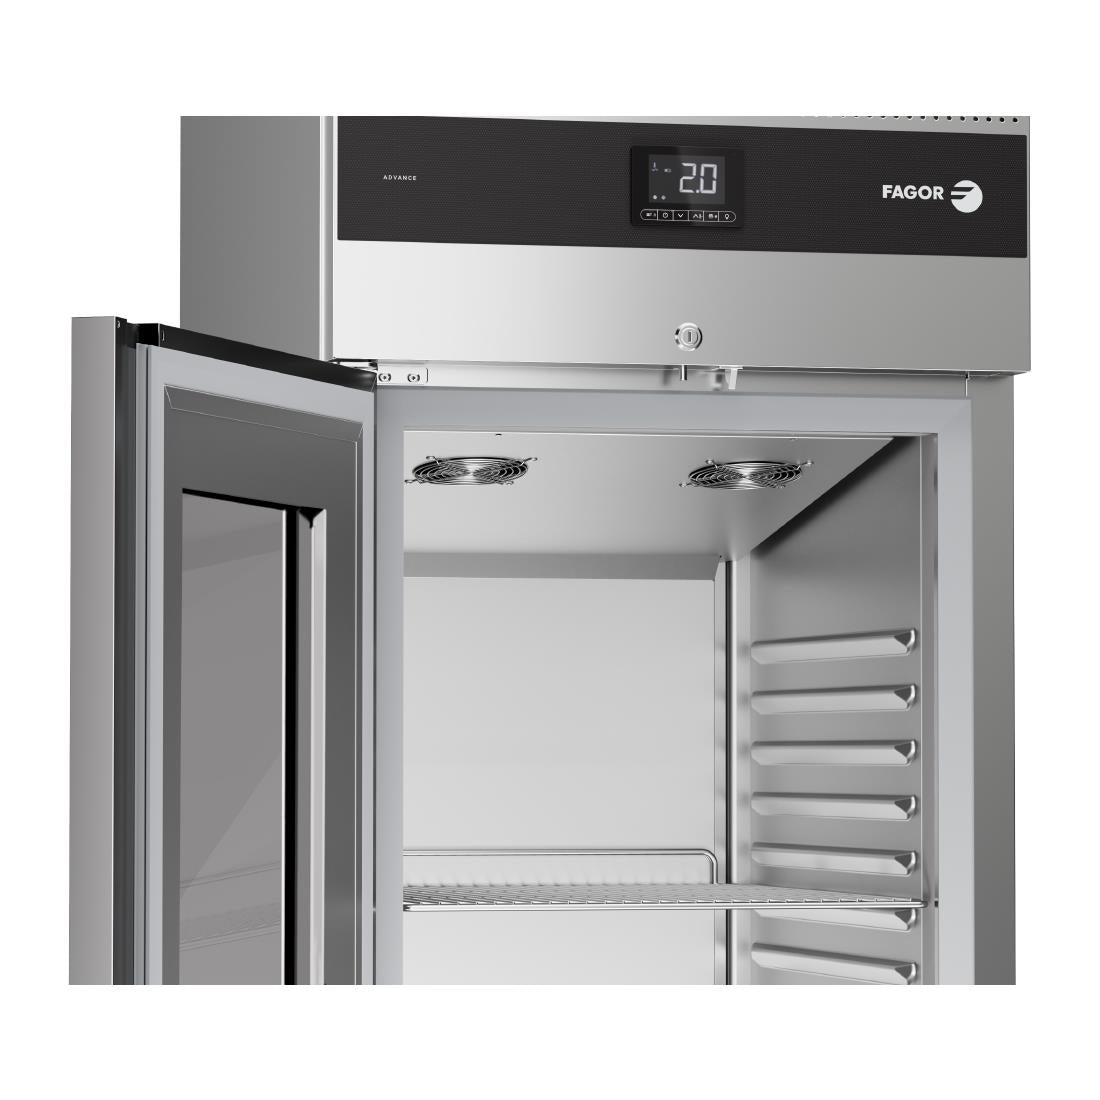 FU005 Fagor Advance Gastronorm Upright Cabinet Display Fridge 1 Door AUP-11G GD JD Catering Equipment Solutions Ltd